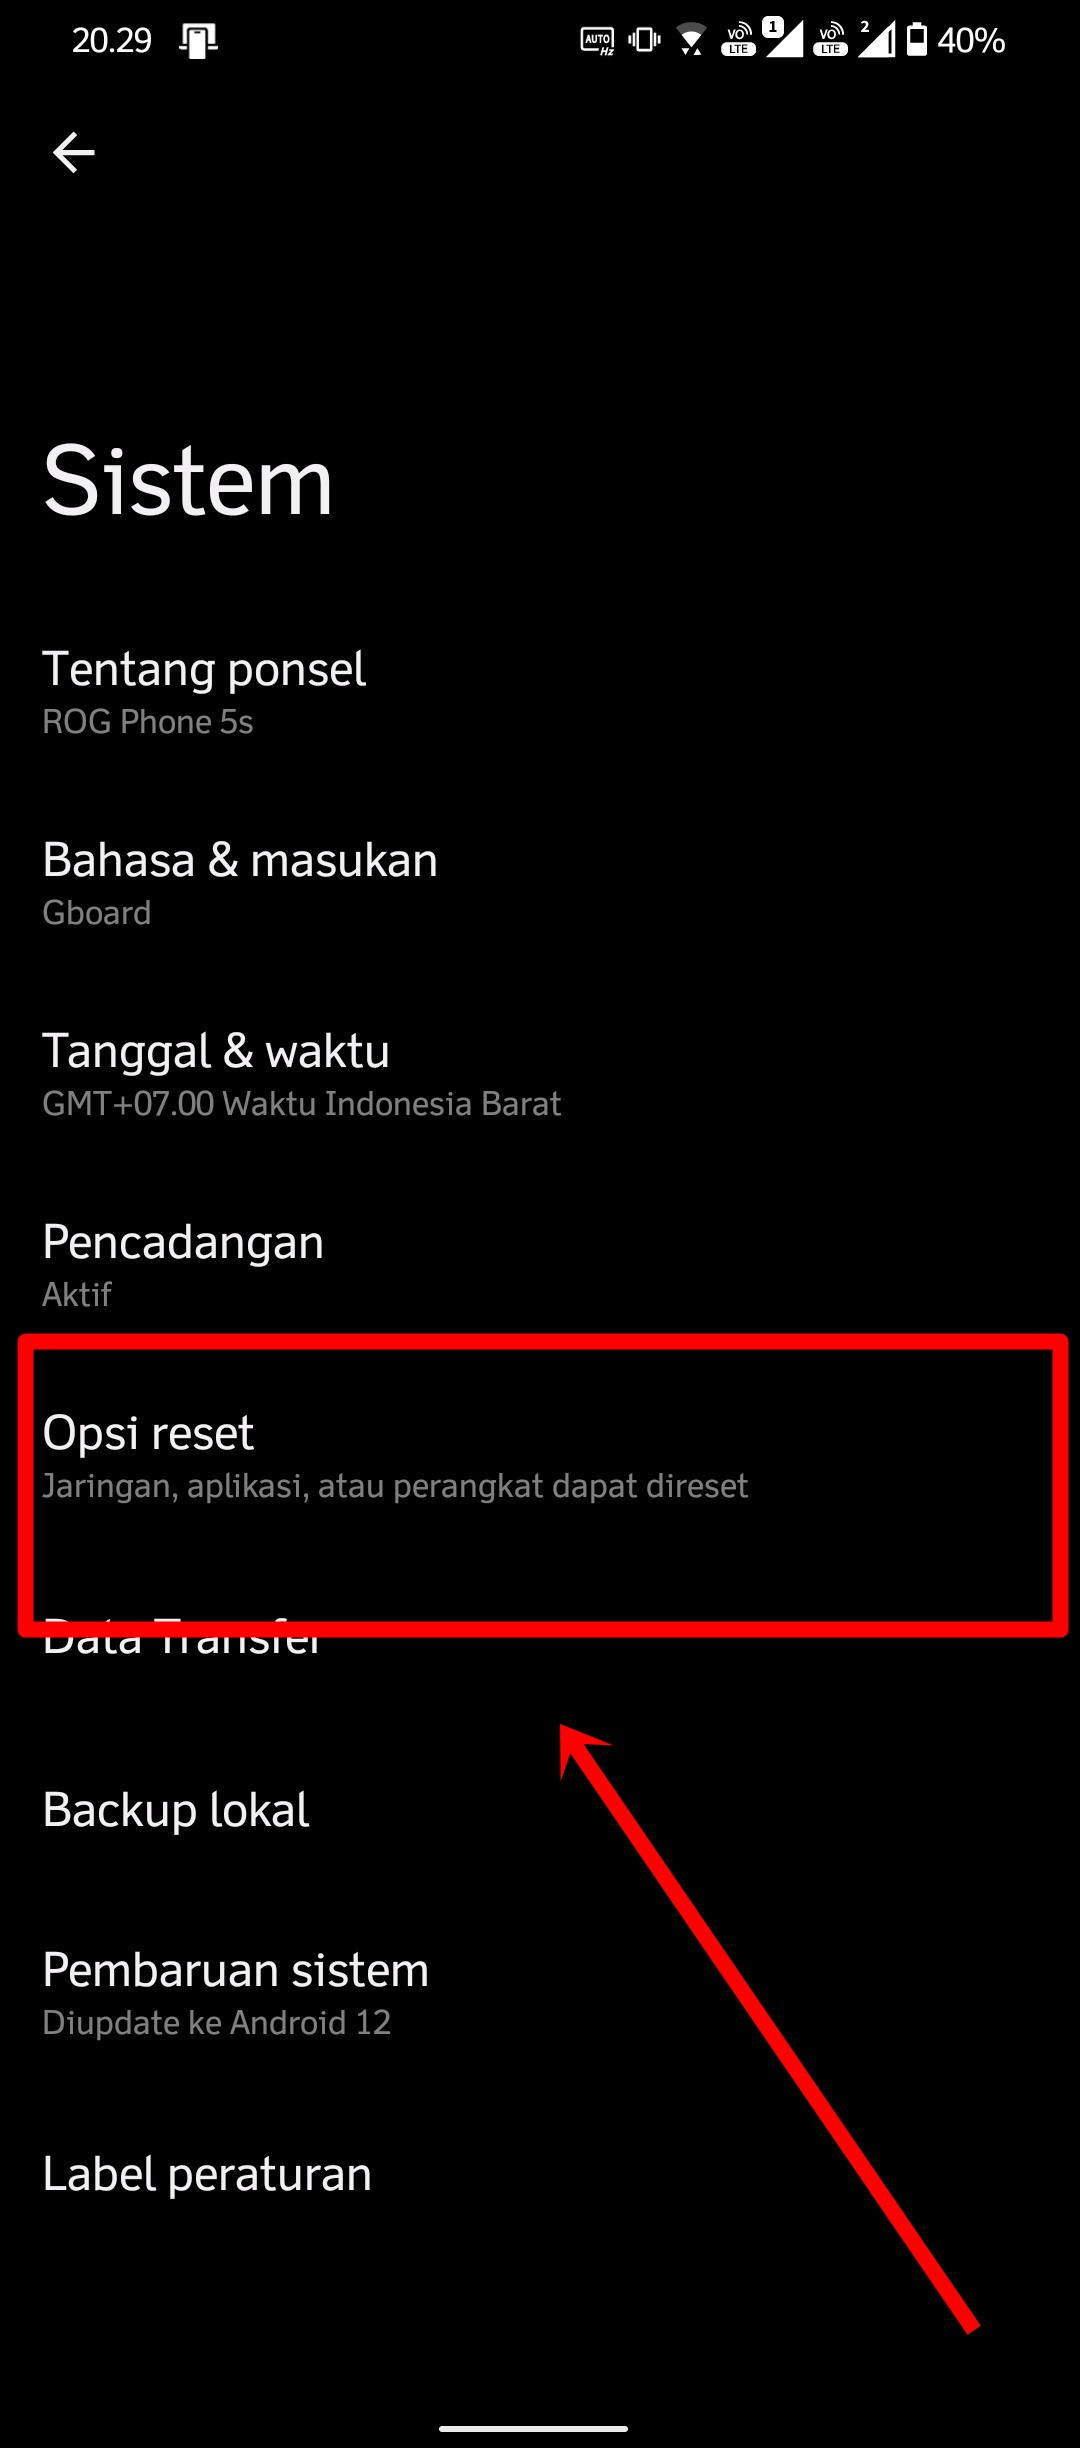 reset network setting android ios